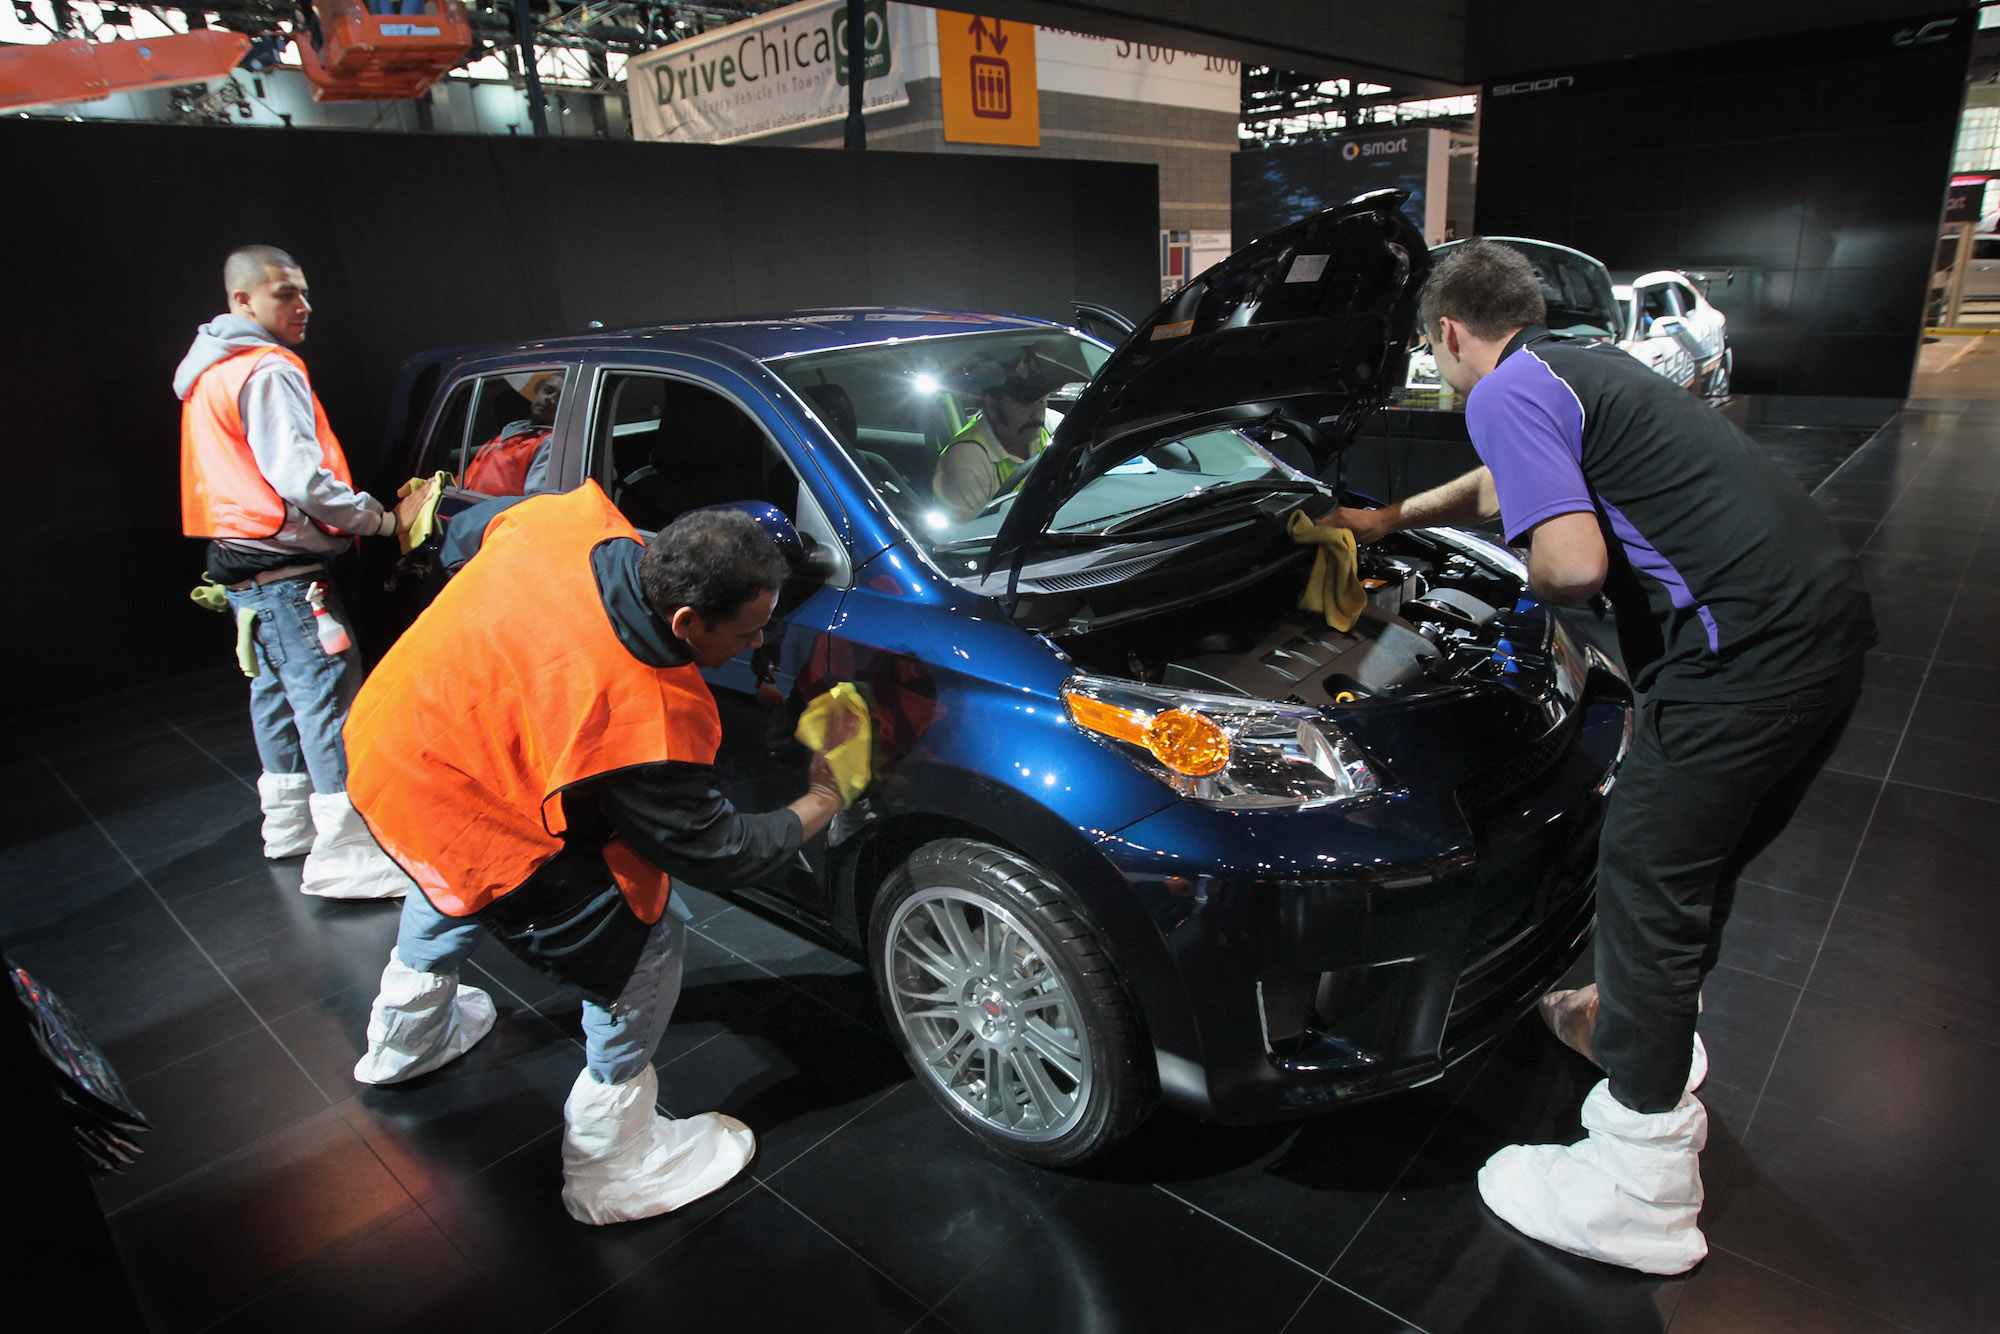 Workers prepare a royal-blue metallic 2012 Scion XD for display at the Chicago Auto Show on February 7, 2012, in Chicago, Illinois